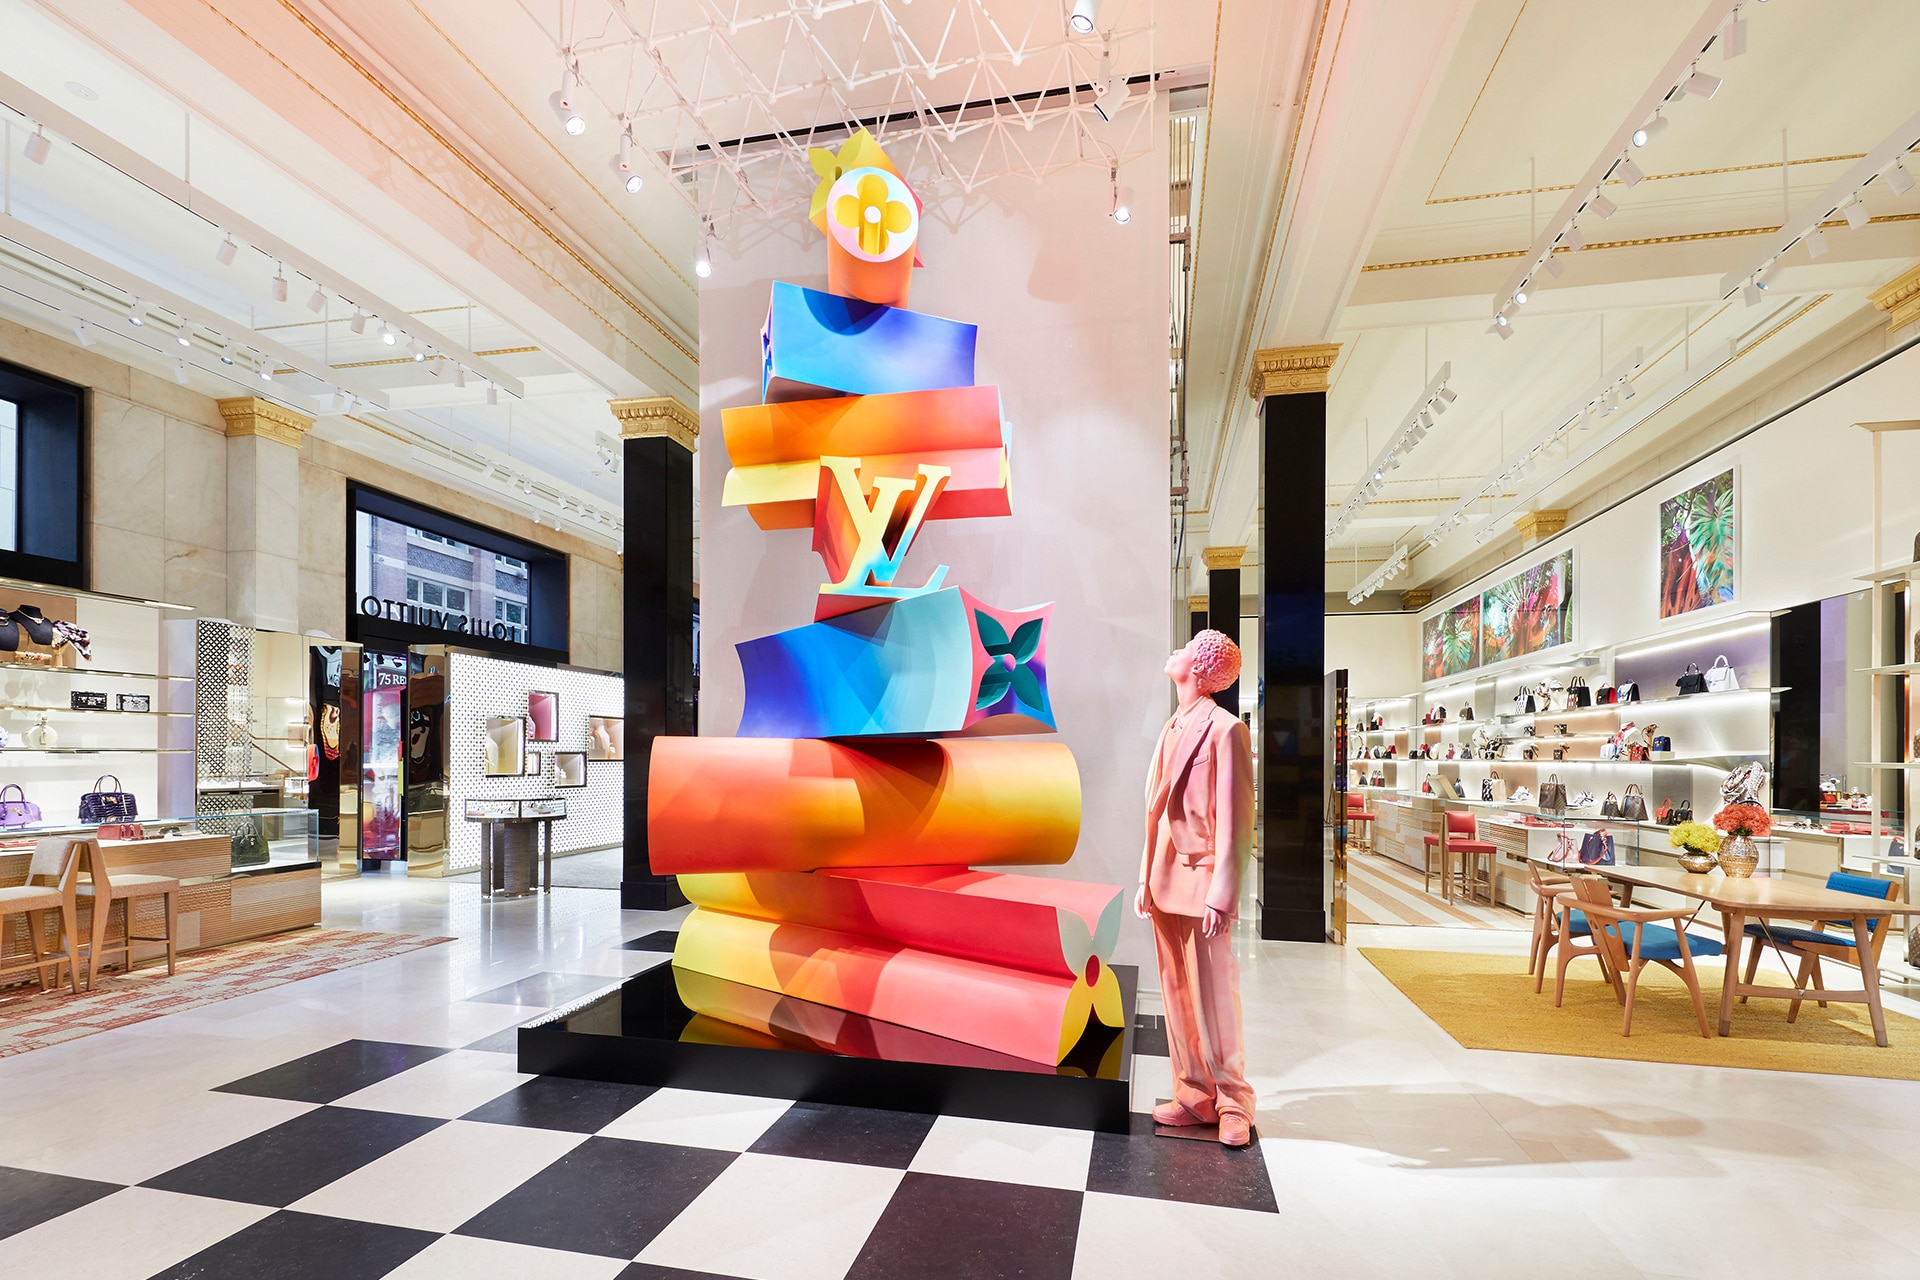 Louis Vuitton Brisbane opens with local artists